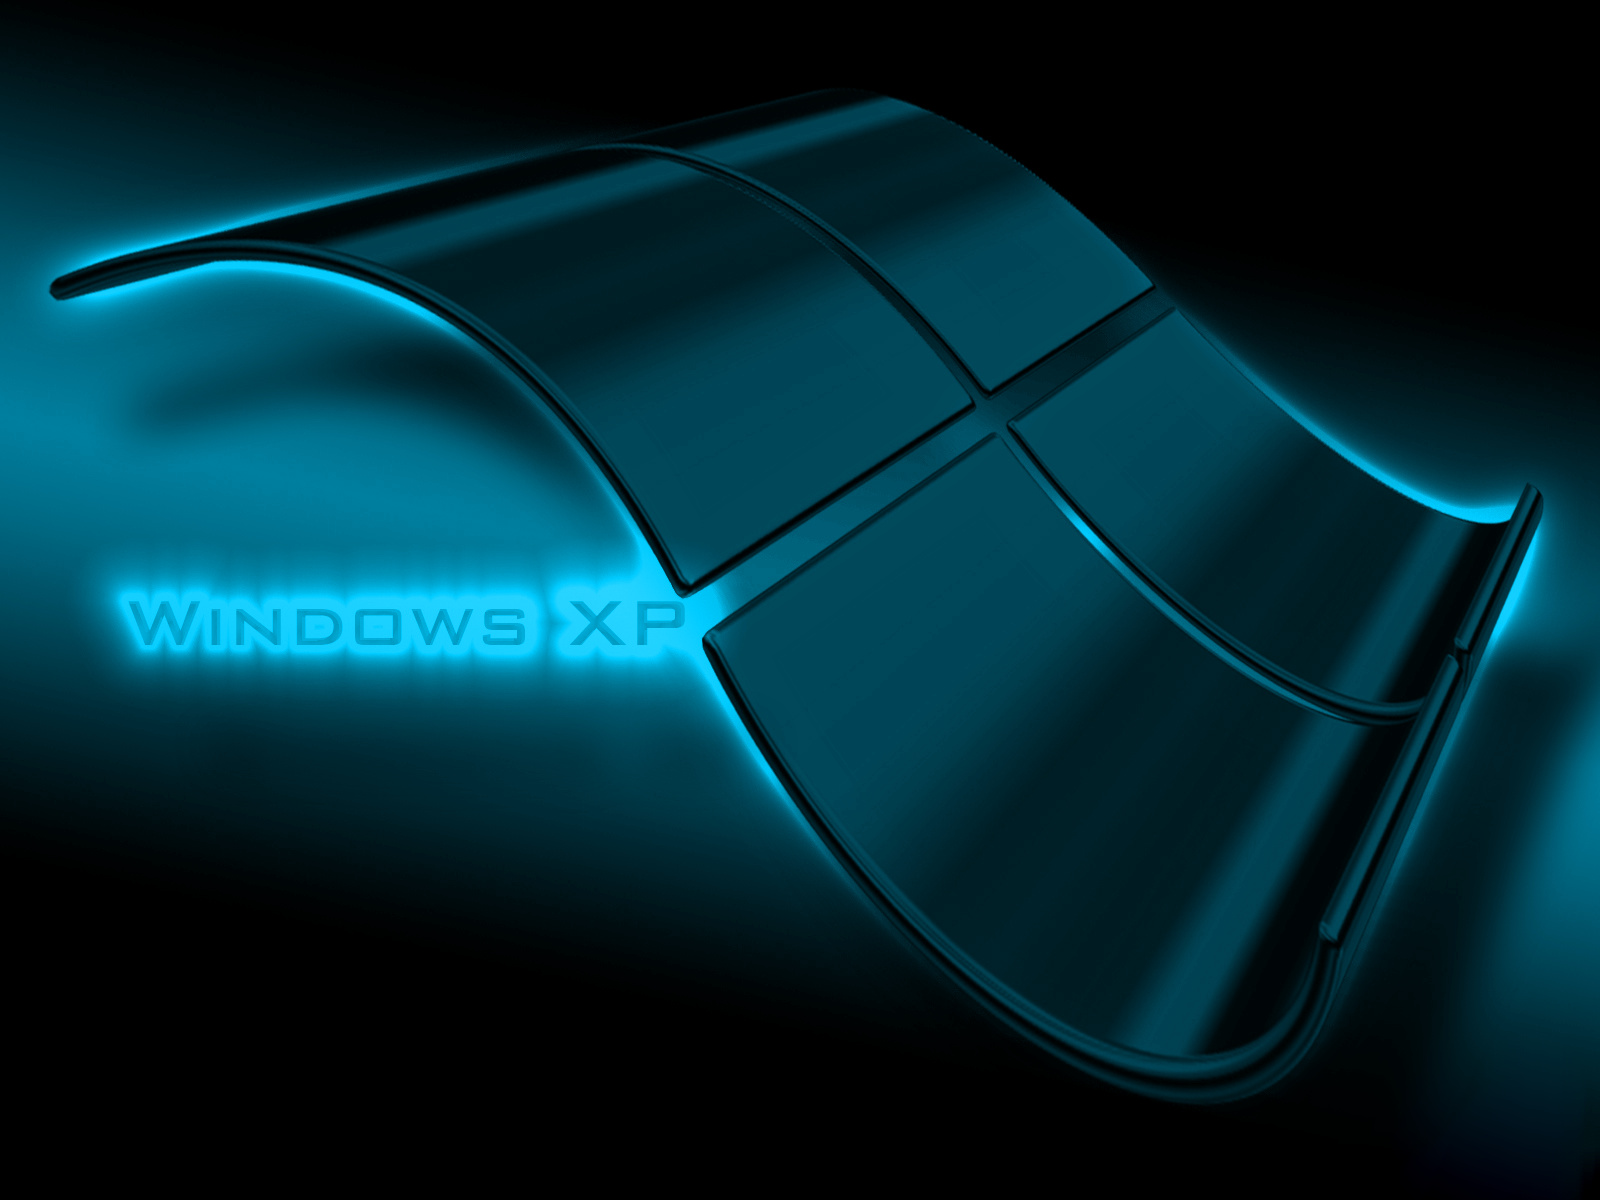 3d wallpapers for desktop windows xp is the sources of 3d ...